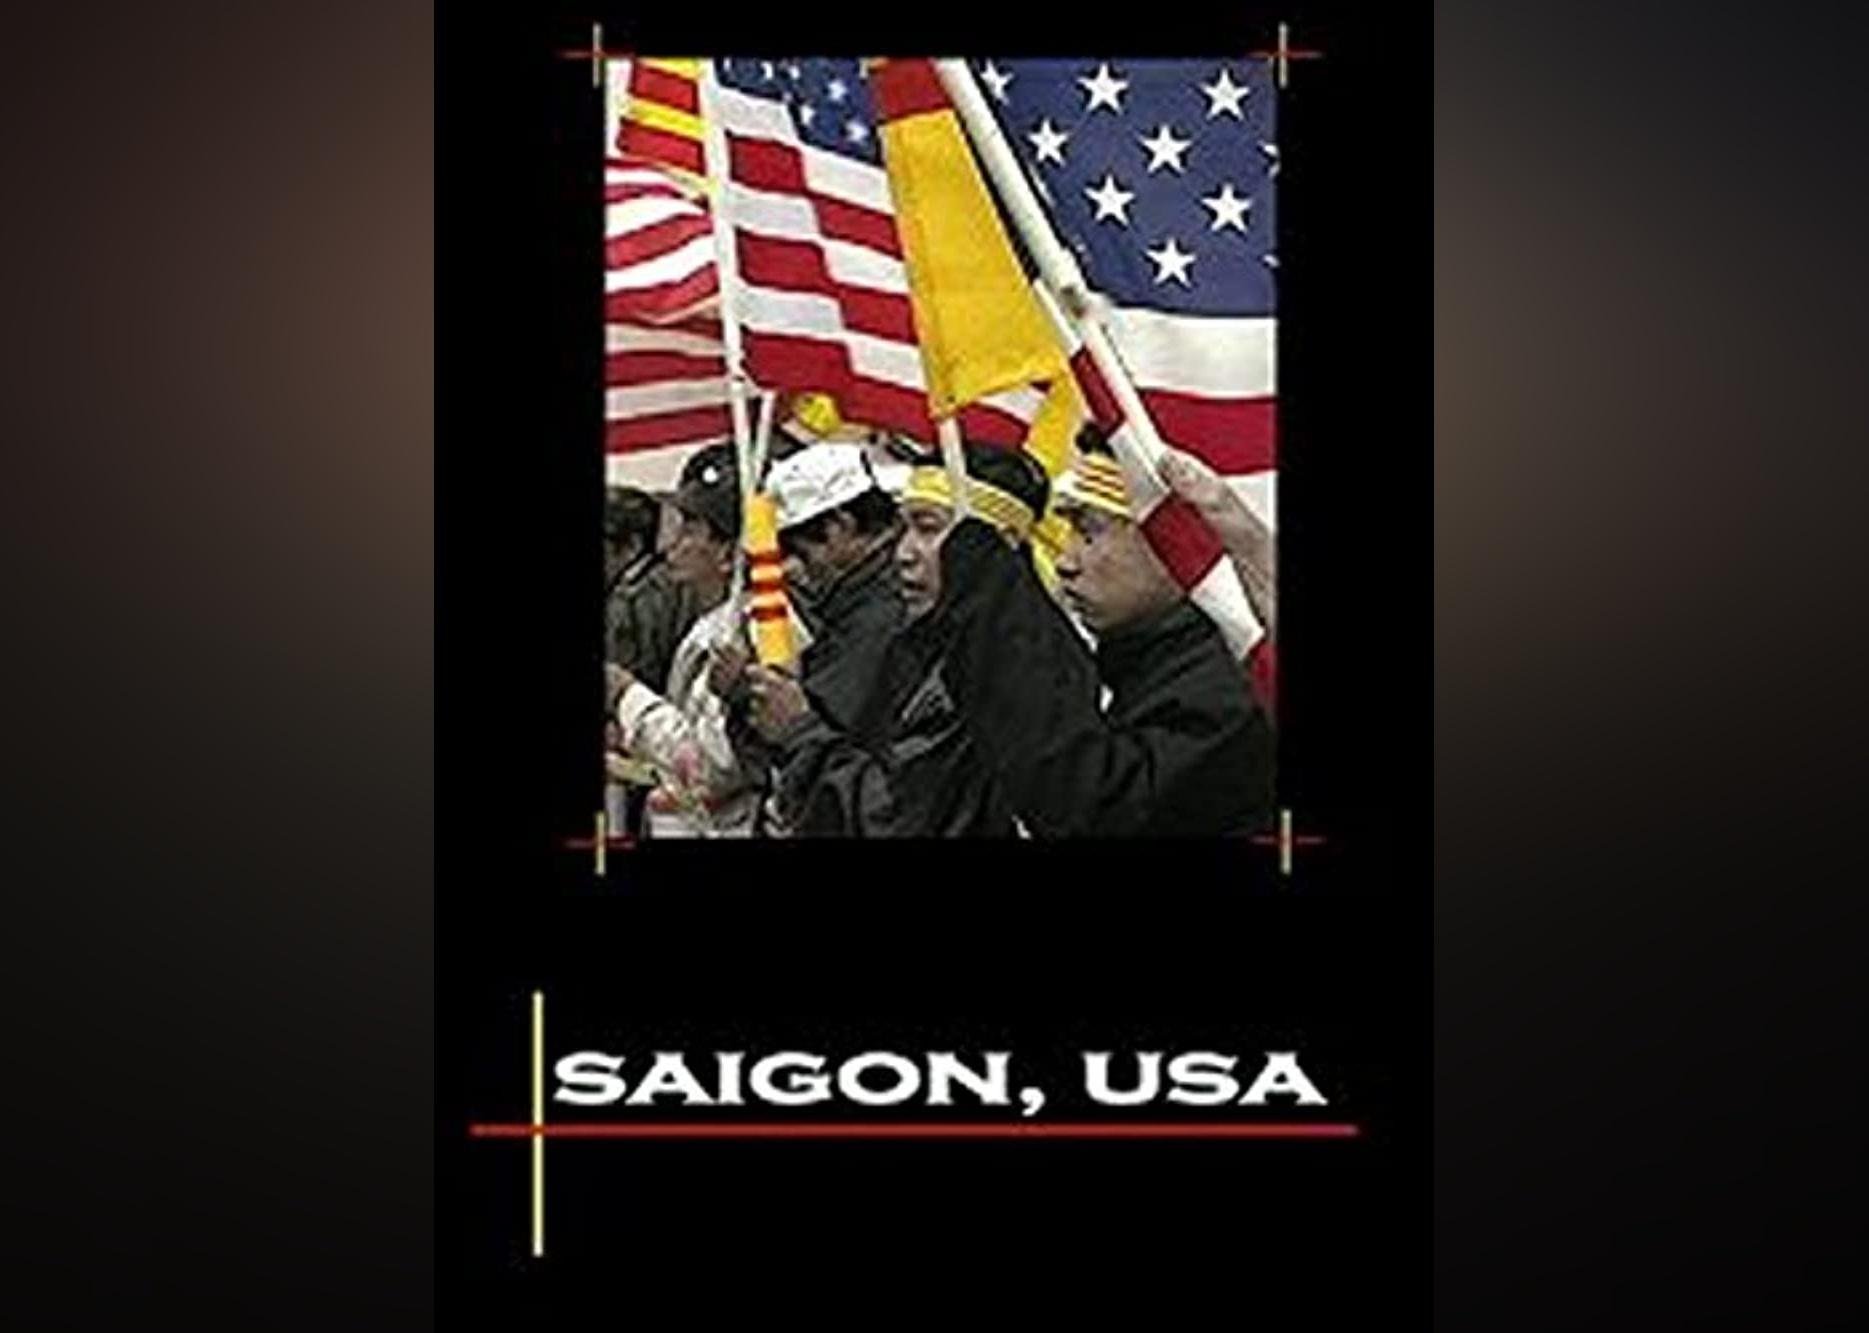 Promotional poster from the film "Saigon, U.S.A."